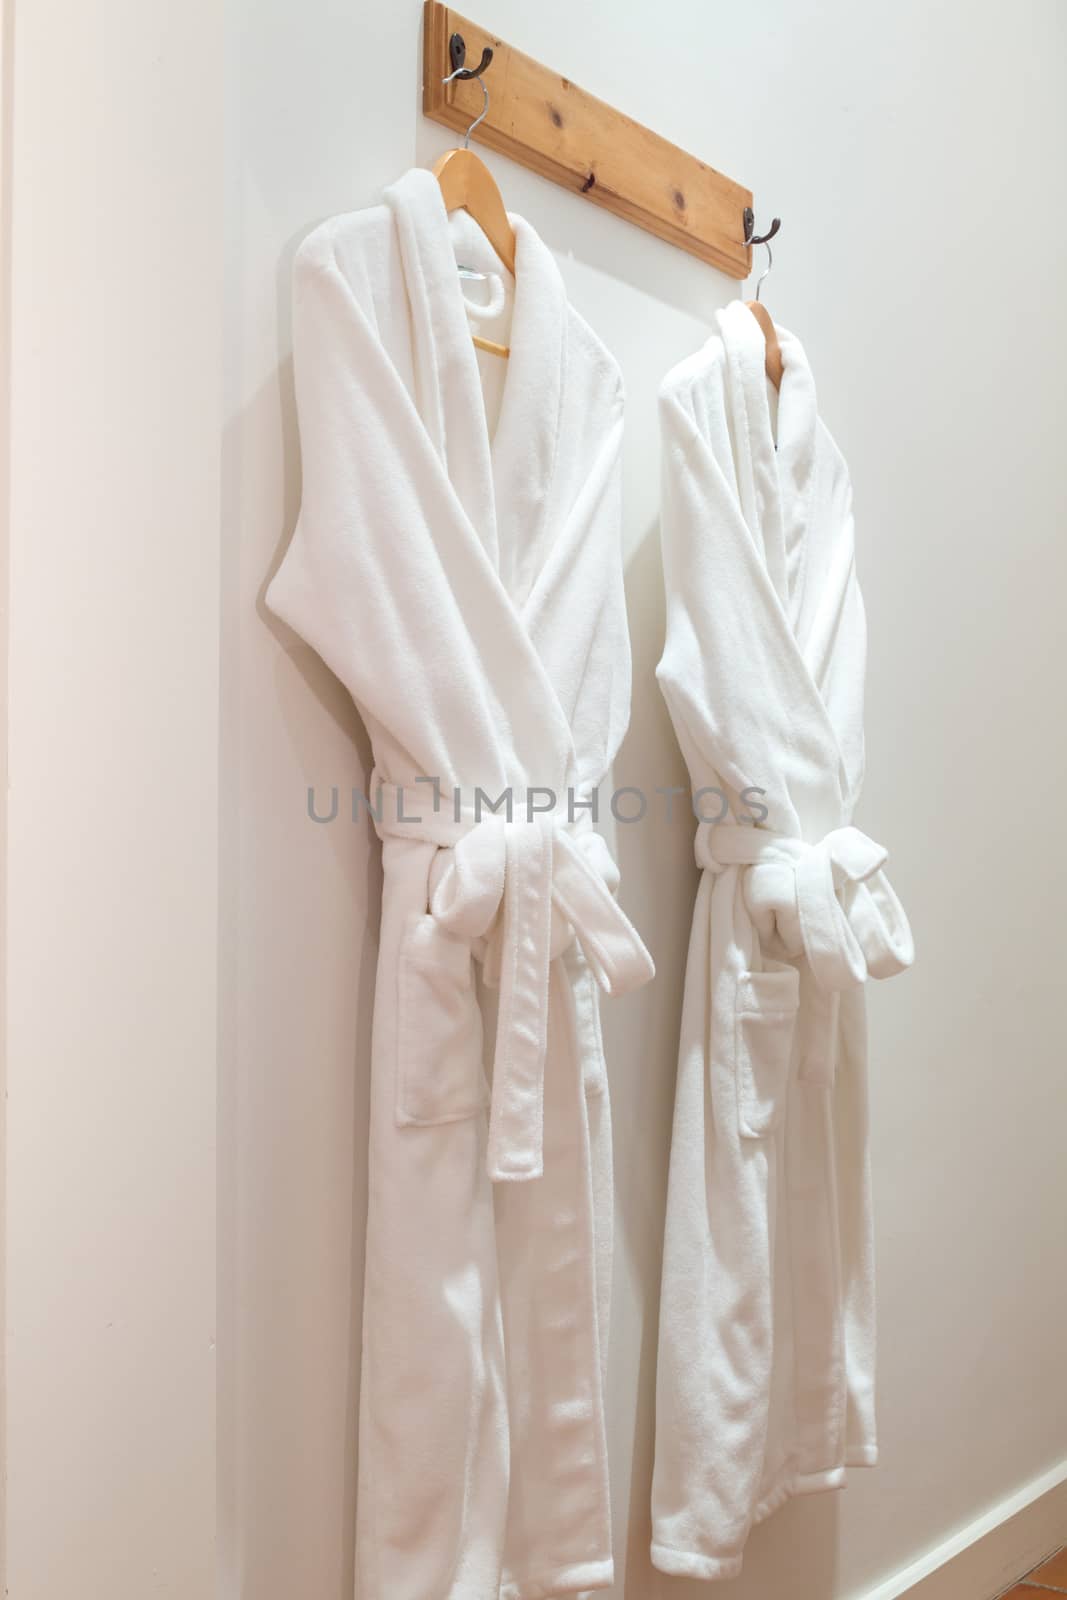 Two bathrobes hanging on hooks mounted on the wall